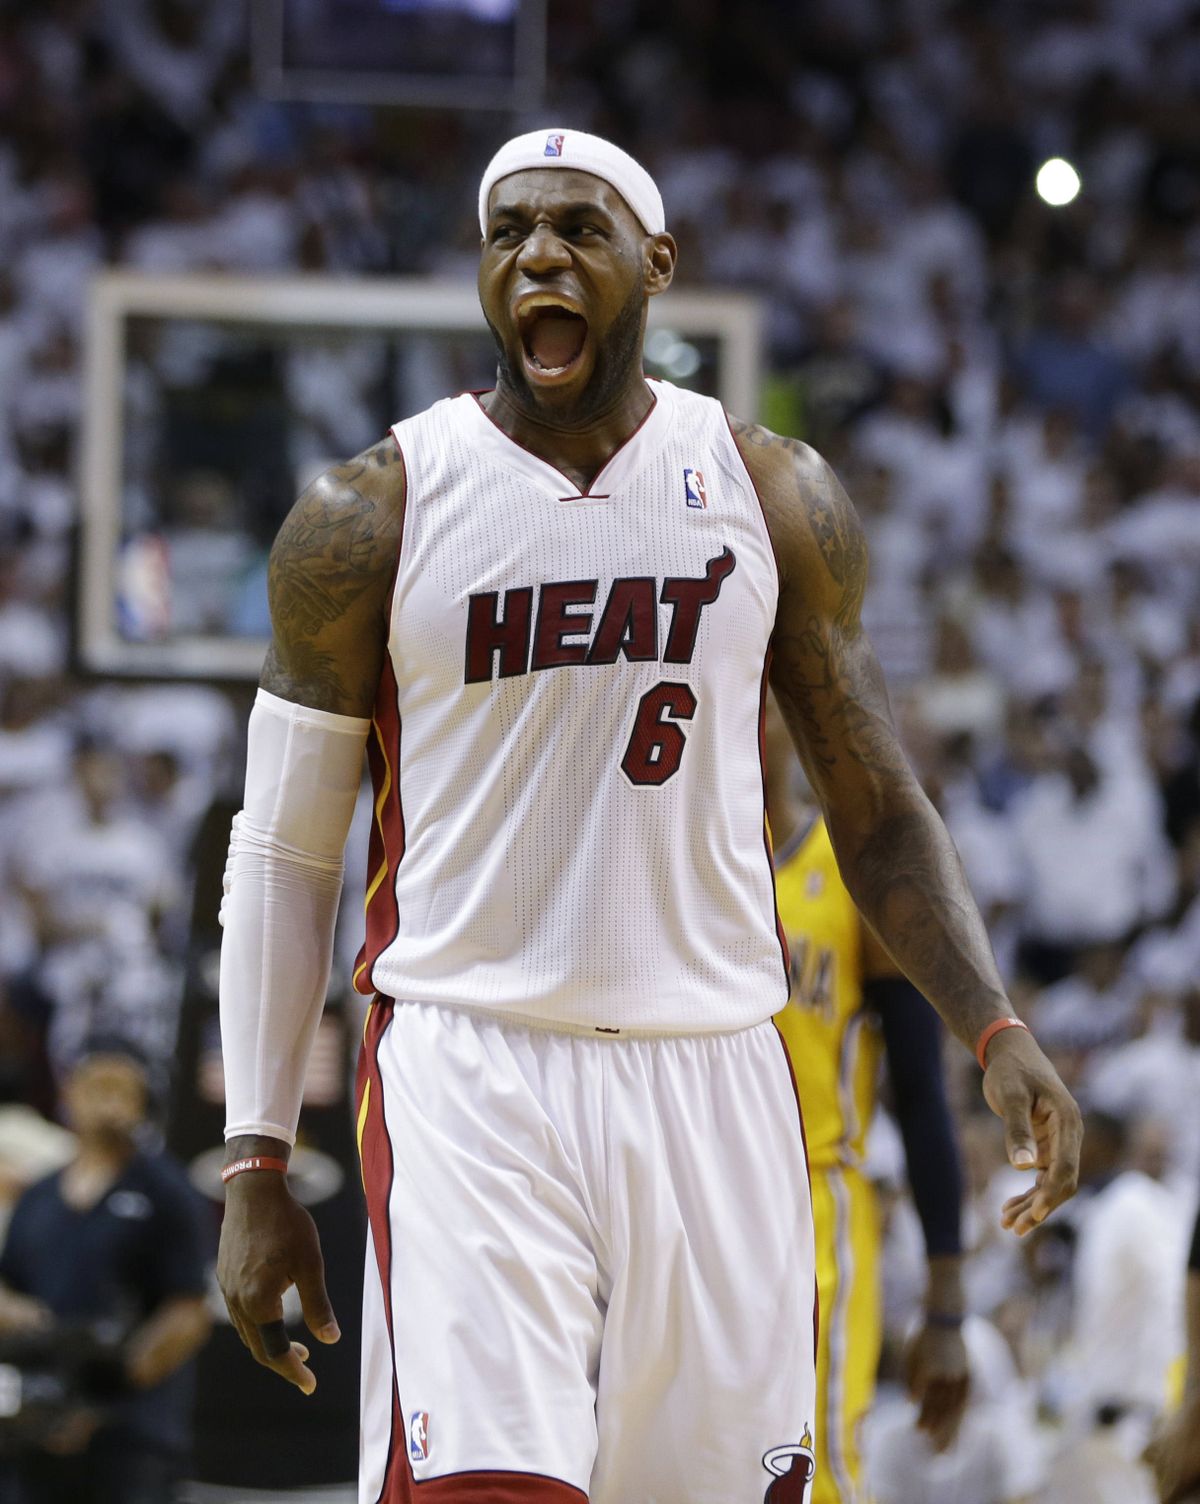 Heat forward LeBron James led host Miami with 26 points in Game 3 victory over Indiana. (Associated Press)